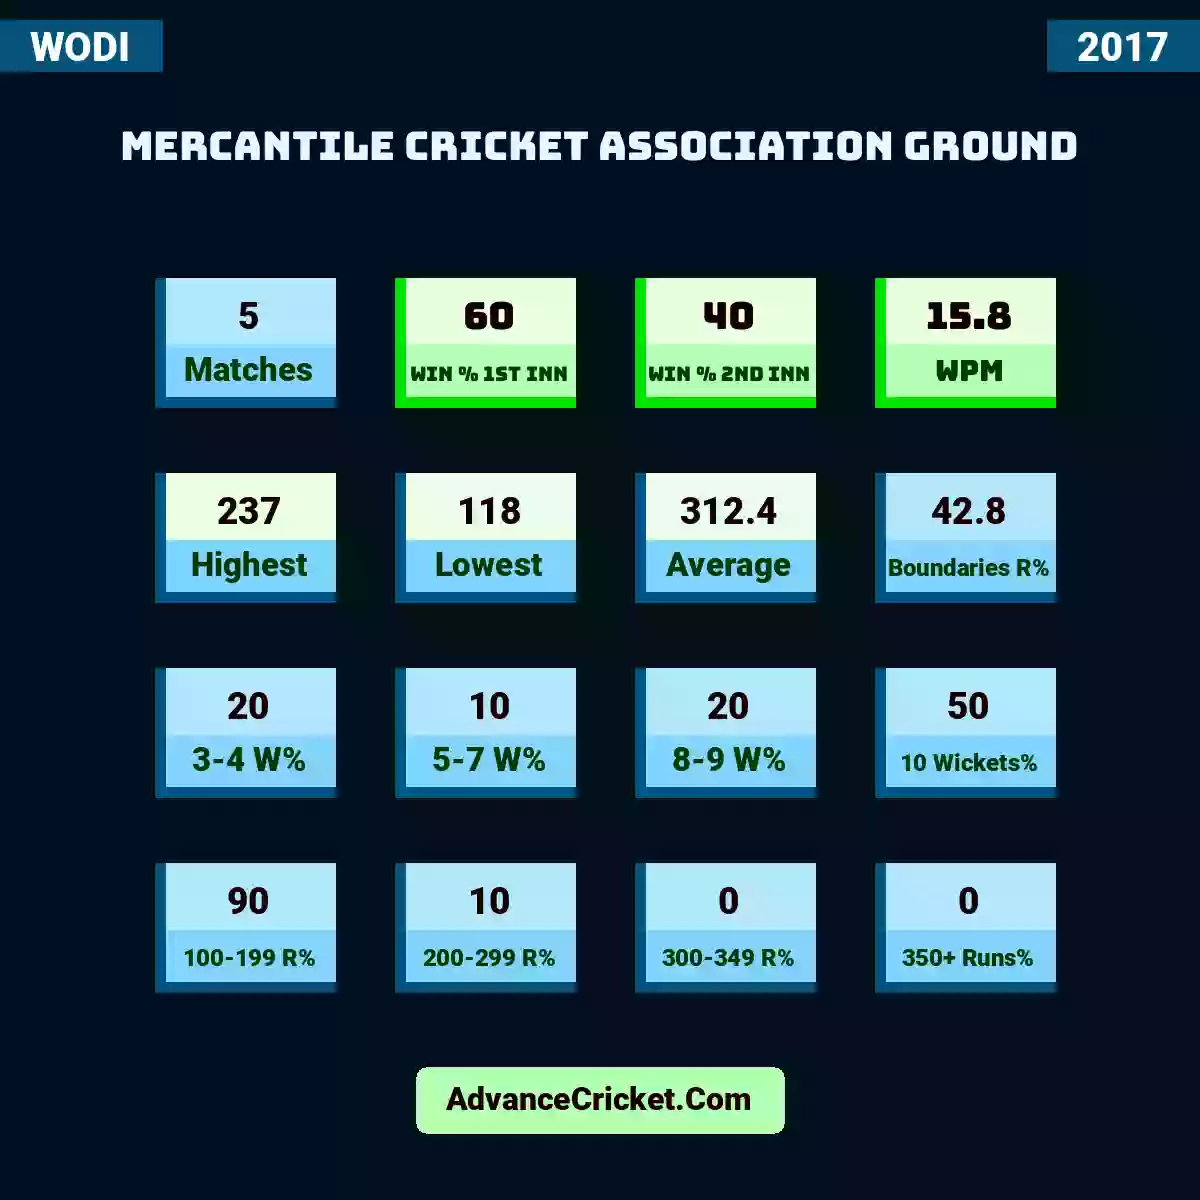 Image showing Mercantile Cricket Association Ground with Matches: 5, Win % 1st Inn: 60, Win % 2nd Inn: 40, WPM: 15.8, Highest: 237, Lowest: 118, Average: 312.4, Boundaries R%: 42.8, 3-4 W%: 20, 5-7 W%: 10, 8-9 W%: 20, 10 Wickets%: 50, 100-199 R%: 90, 200-299 R%: 10, 300-349 R%: 0, 350+ Runs%: 0.